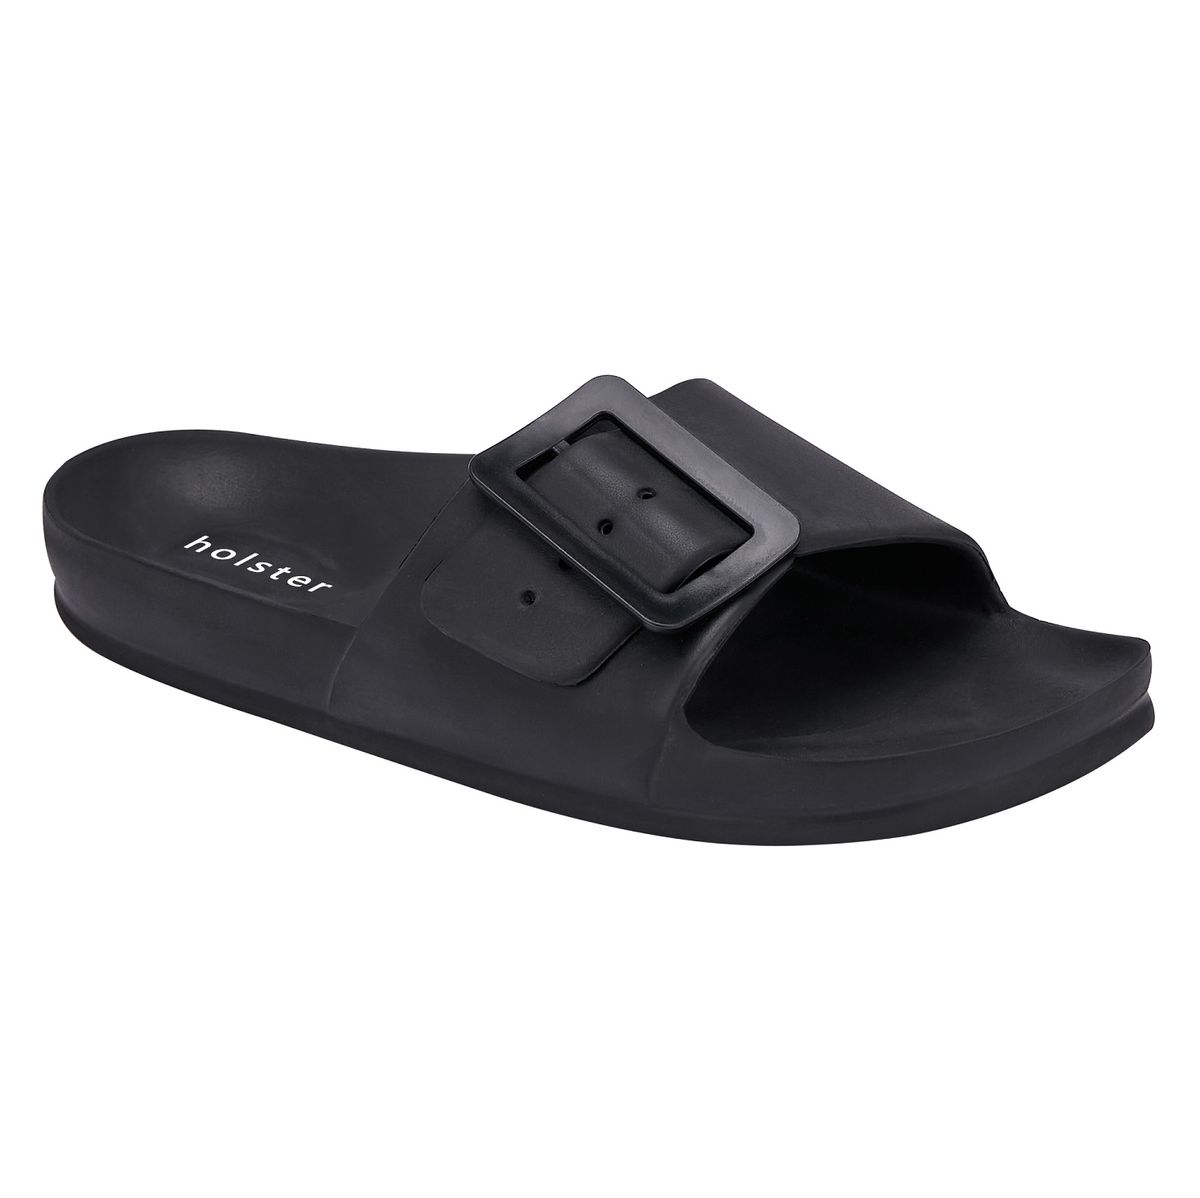 Holster Solace Black | Shop Today. Get it Tomorrow! | takealot.com